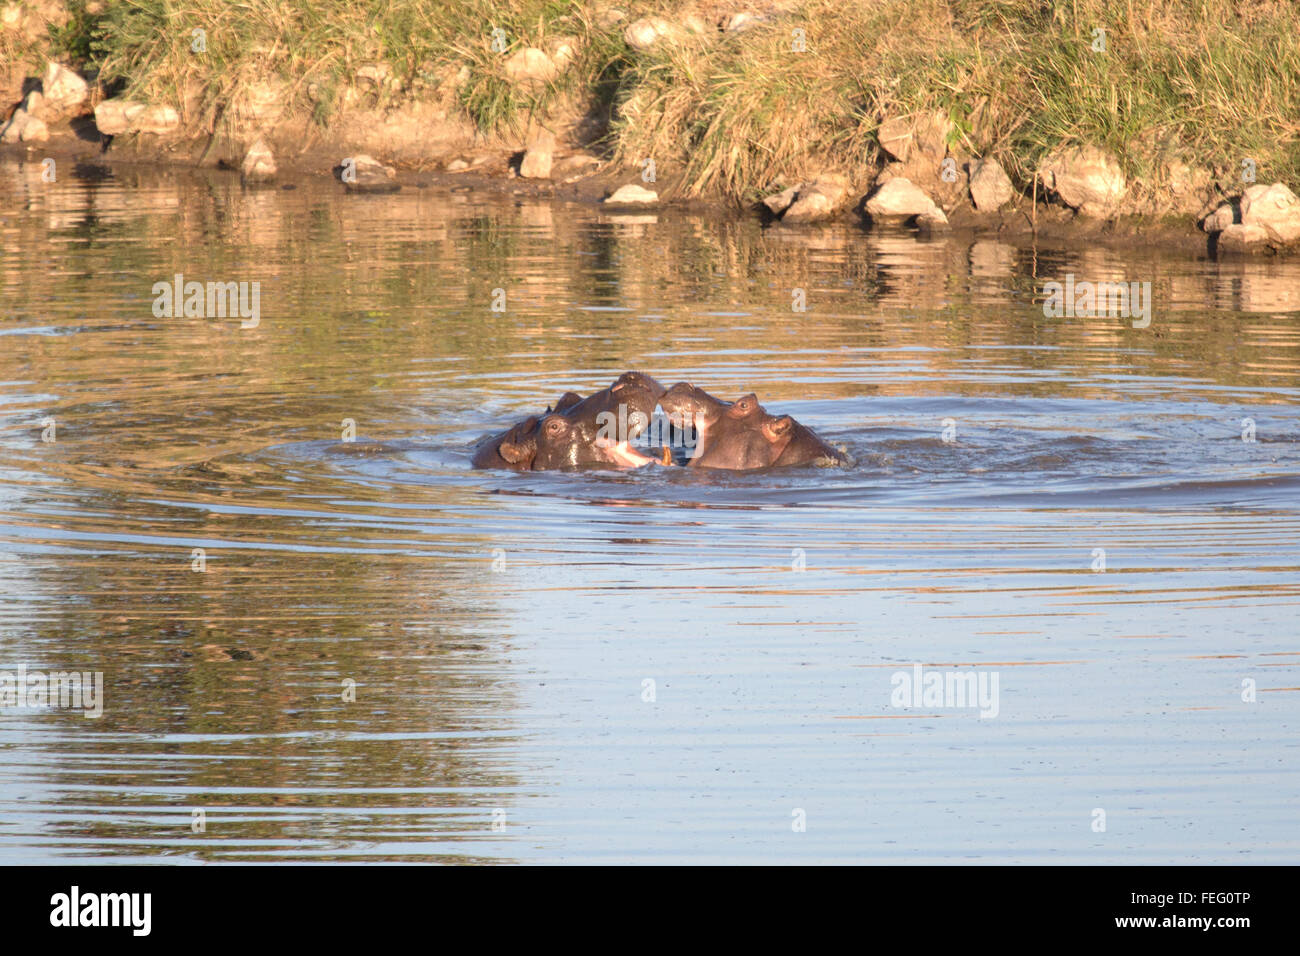 Hippo in a pond Stock Photo